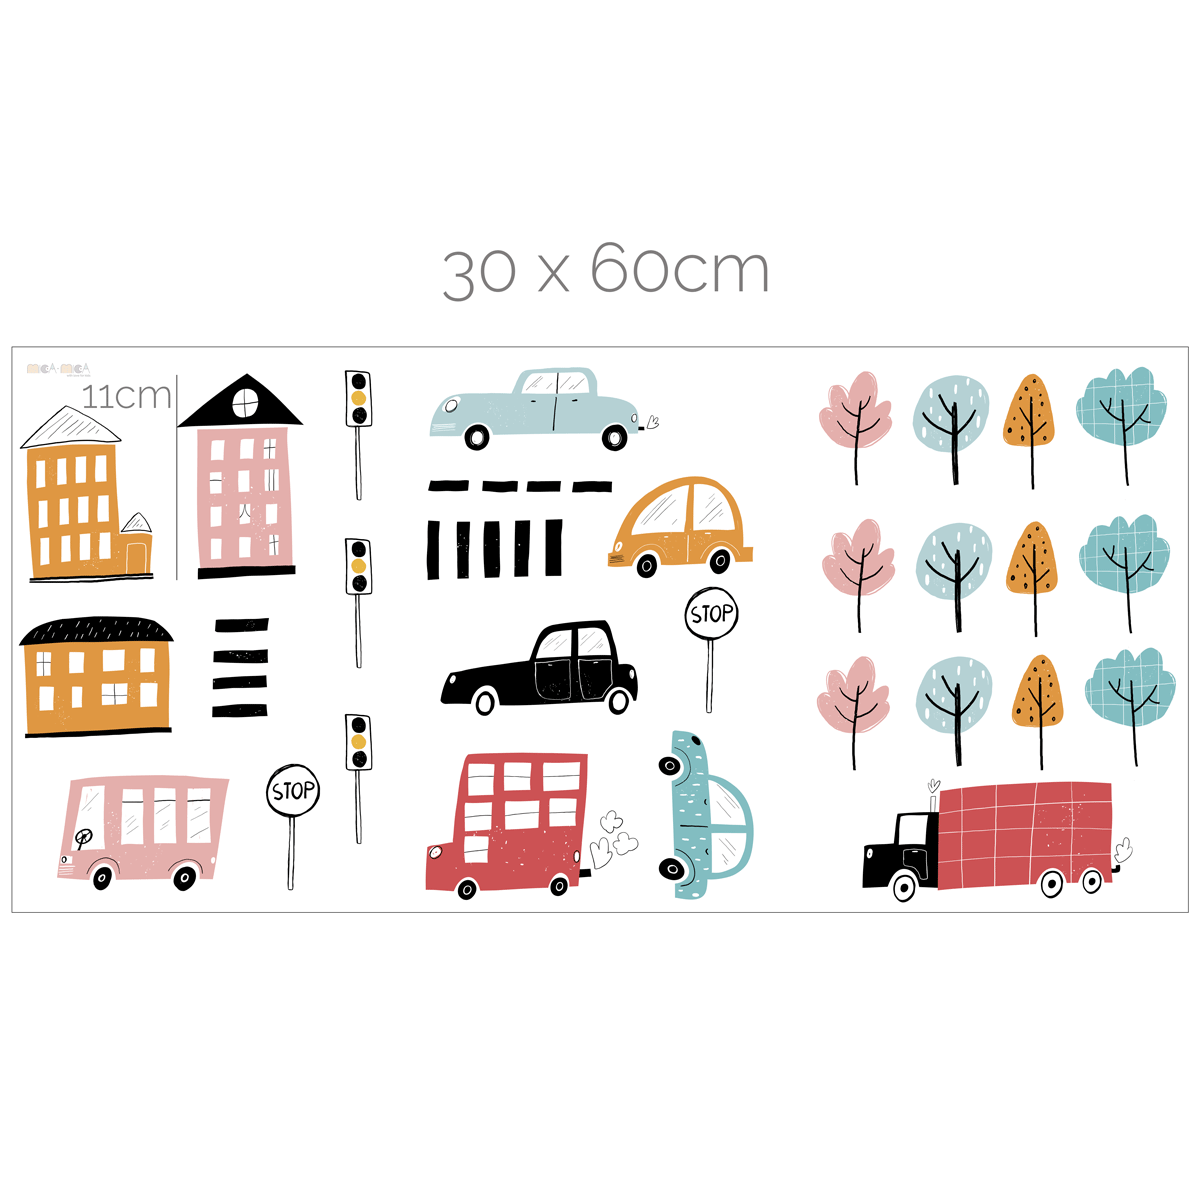 Car wall stickers - Cars in the city